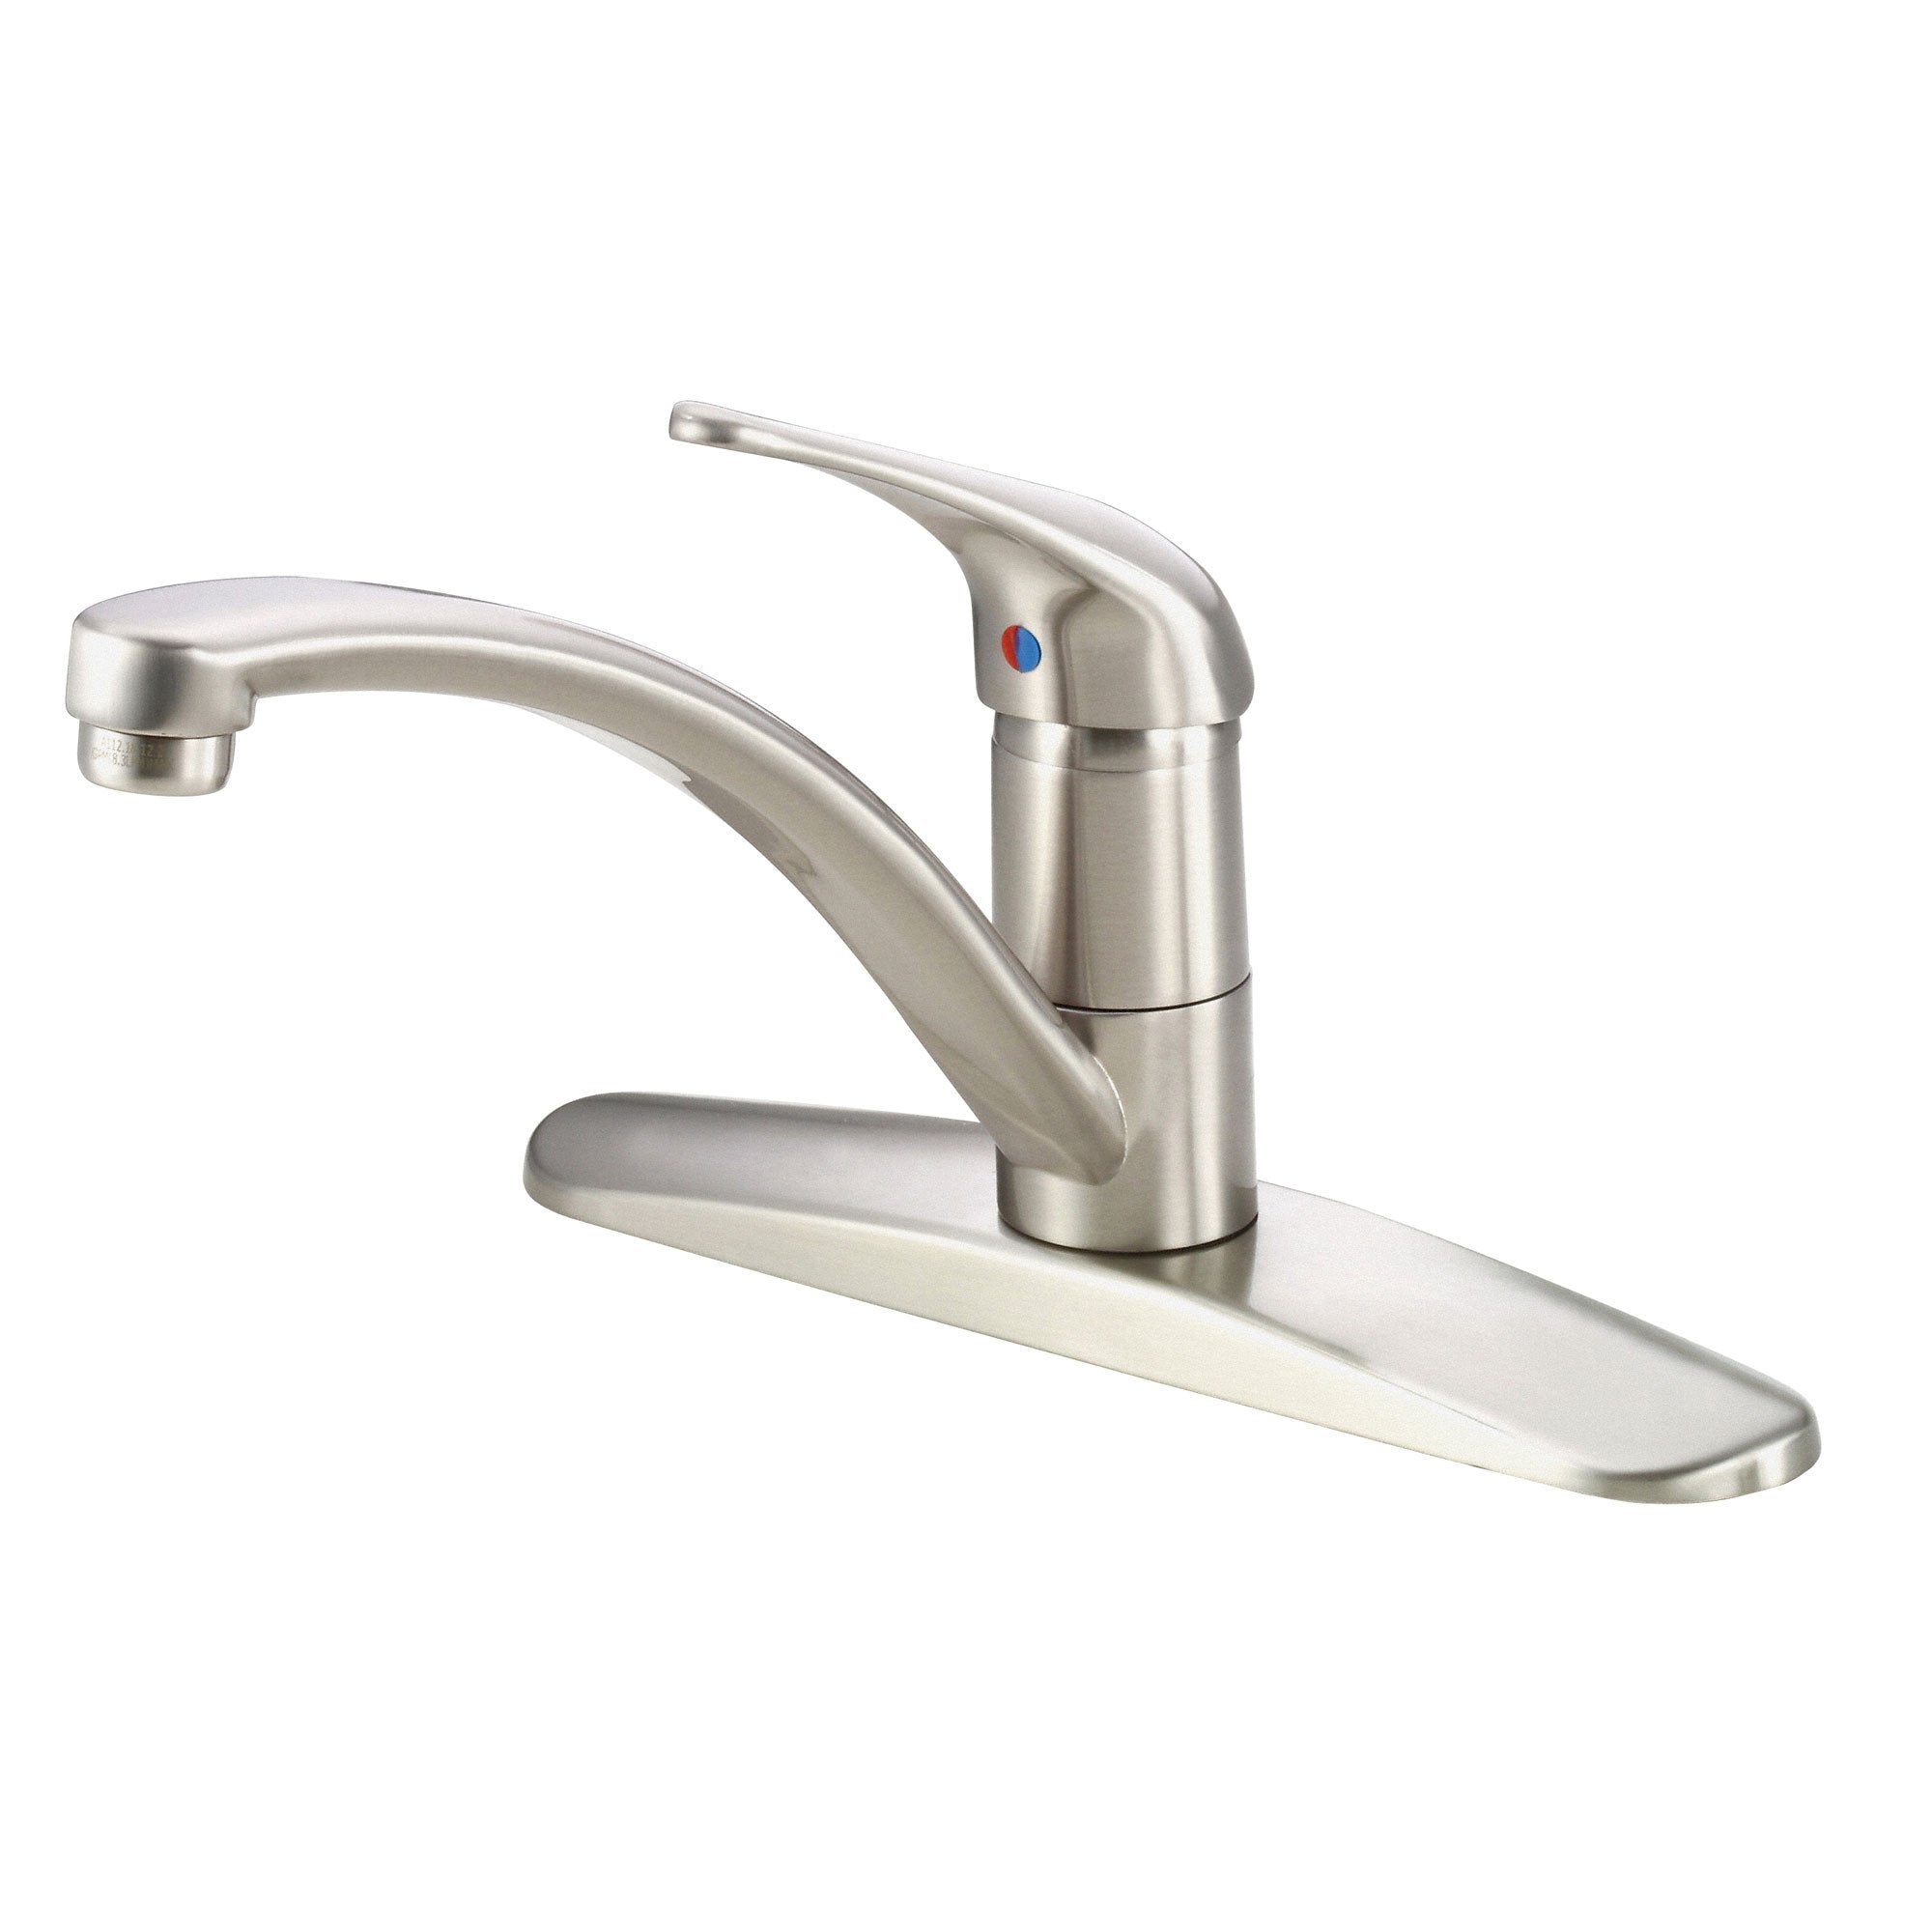 Danze Melrose Stainless Steel Simple Basic Single Handle Kitchen Faucet